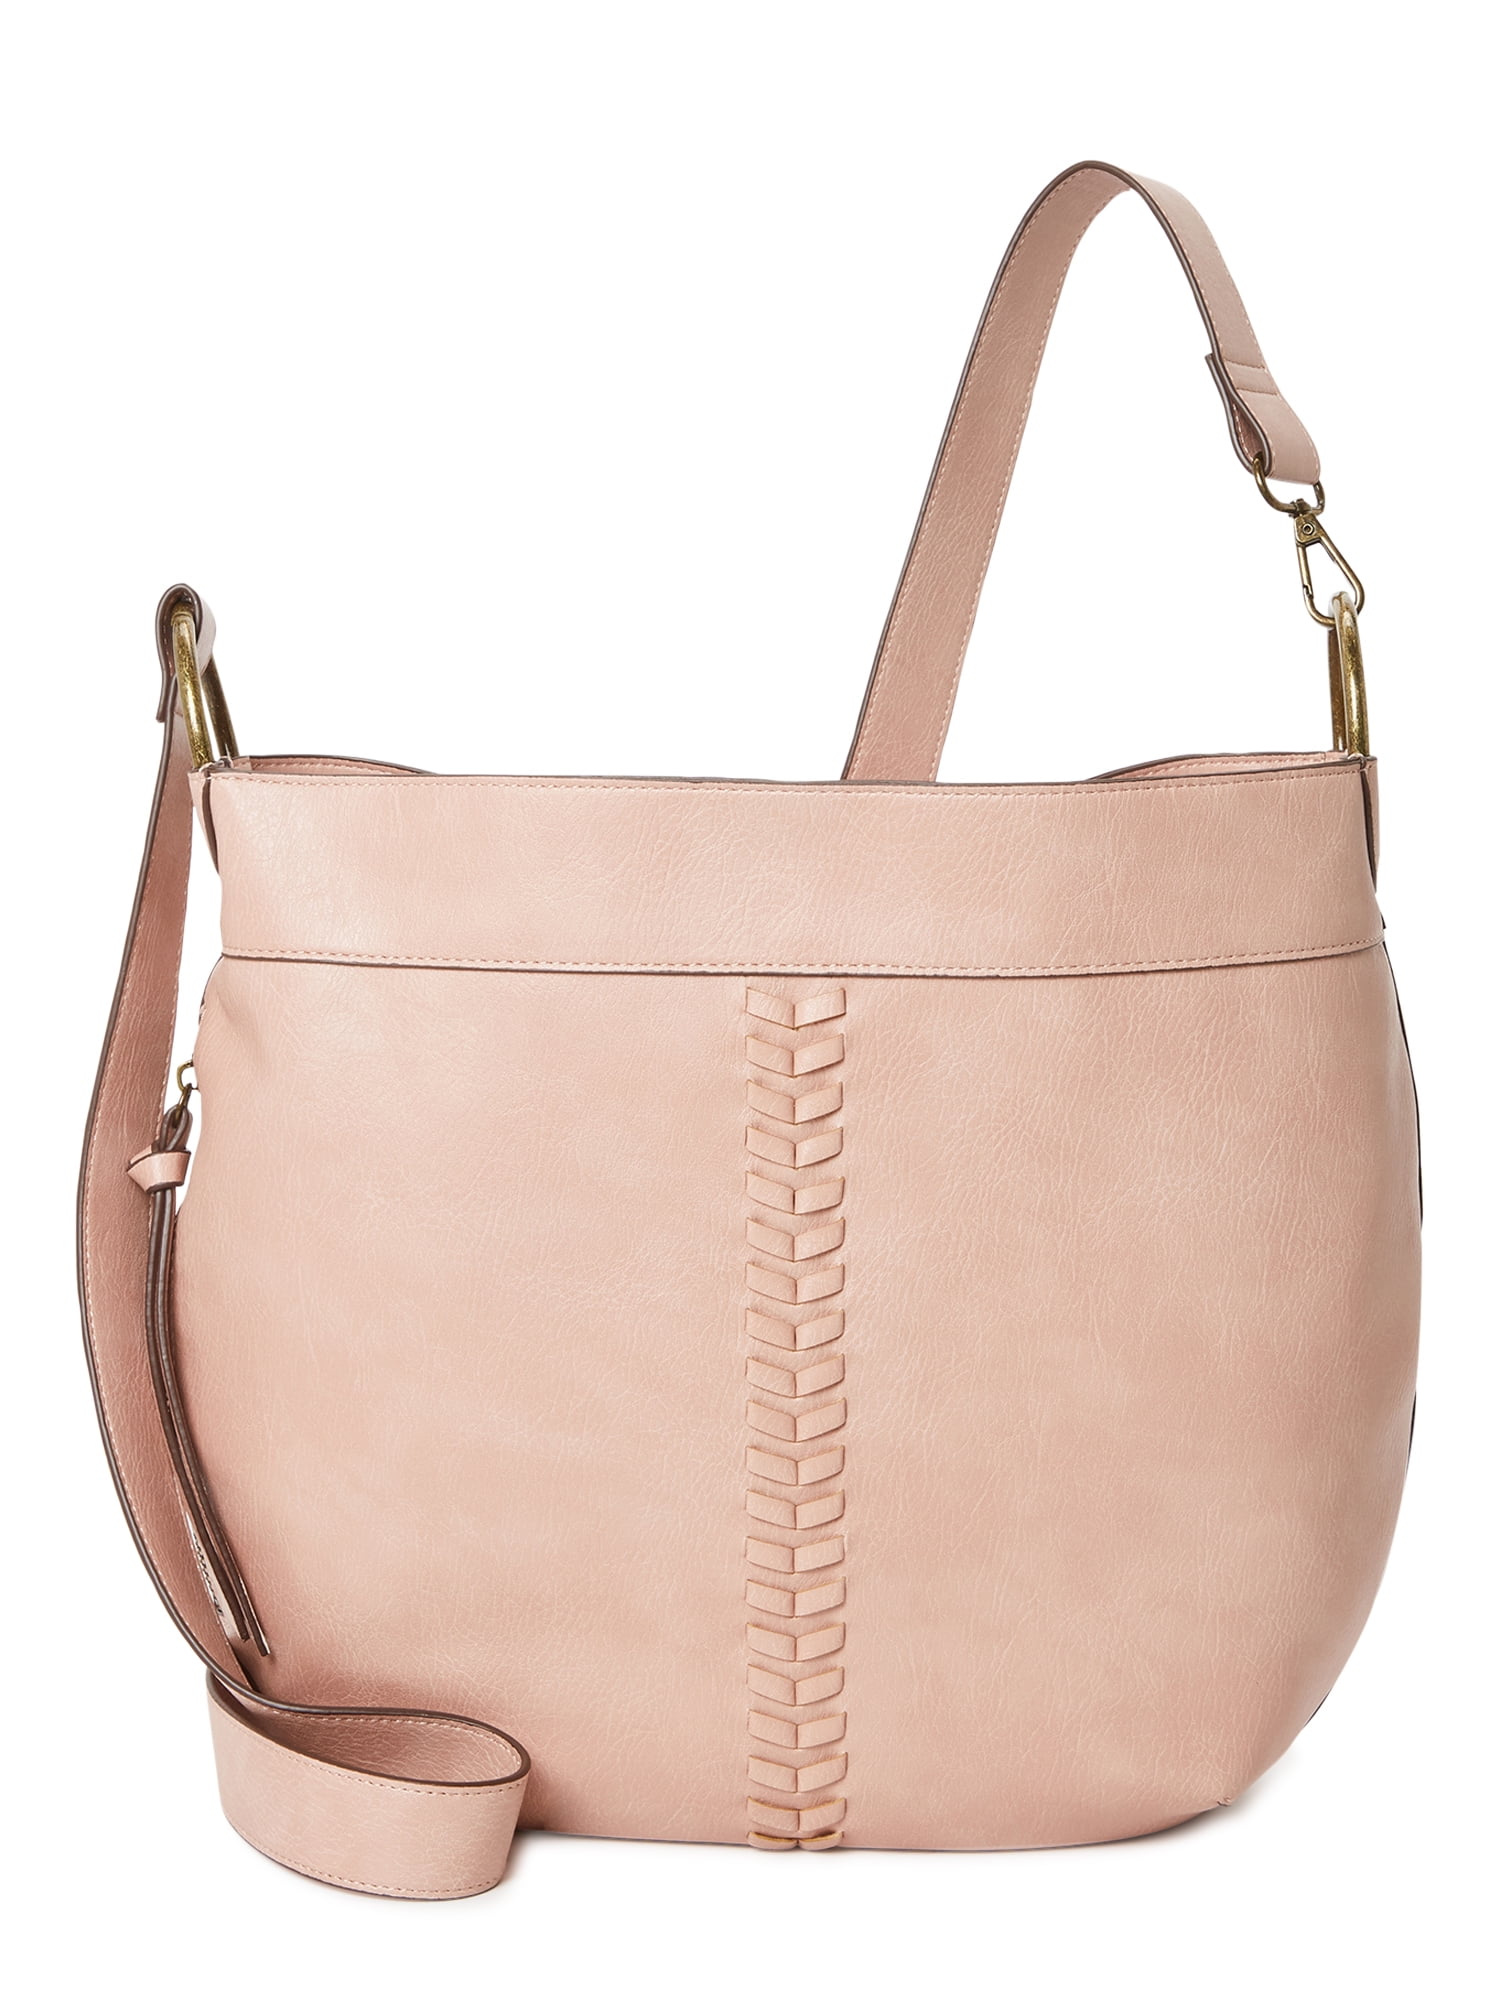 Time and Tru Women's Piper Faux Leather Hobo Handbag Pink